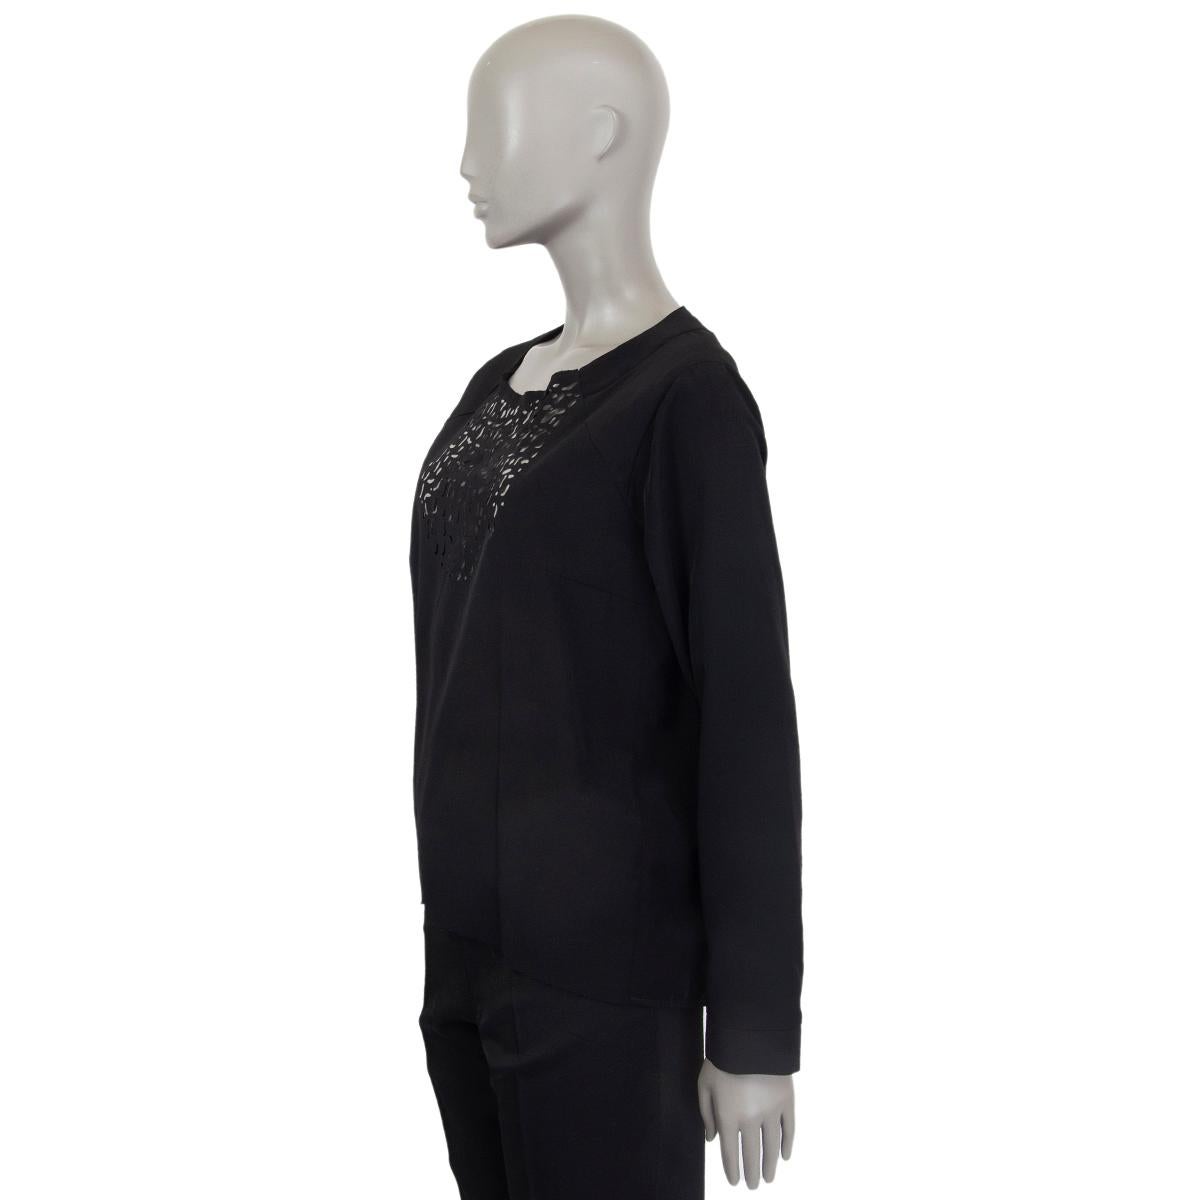 MAISON MARTIN MARGIELA black polyester CUT OUT Blouse Shirt 42 L In Excellent Condition For Sale In Zürich, CH